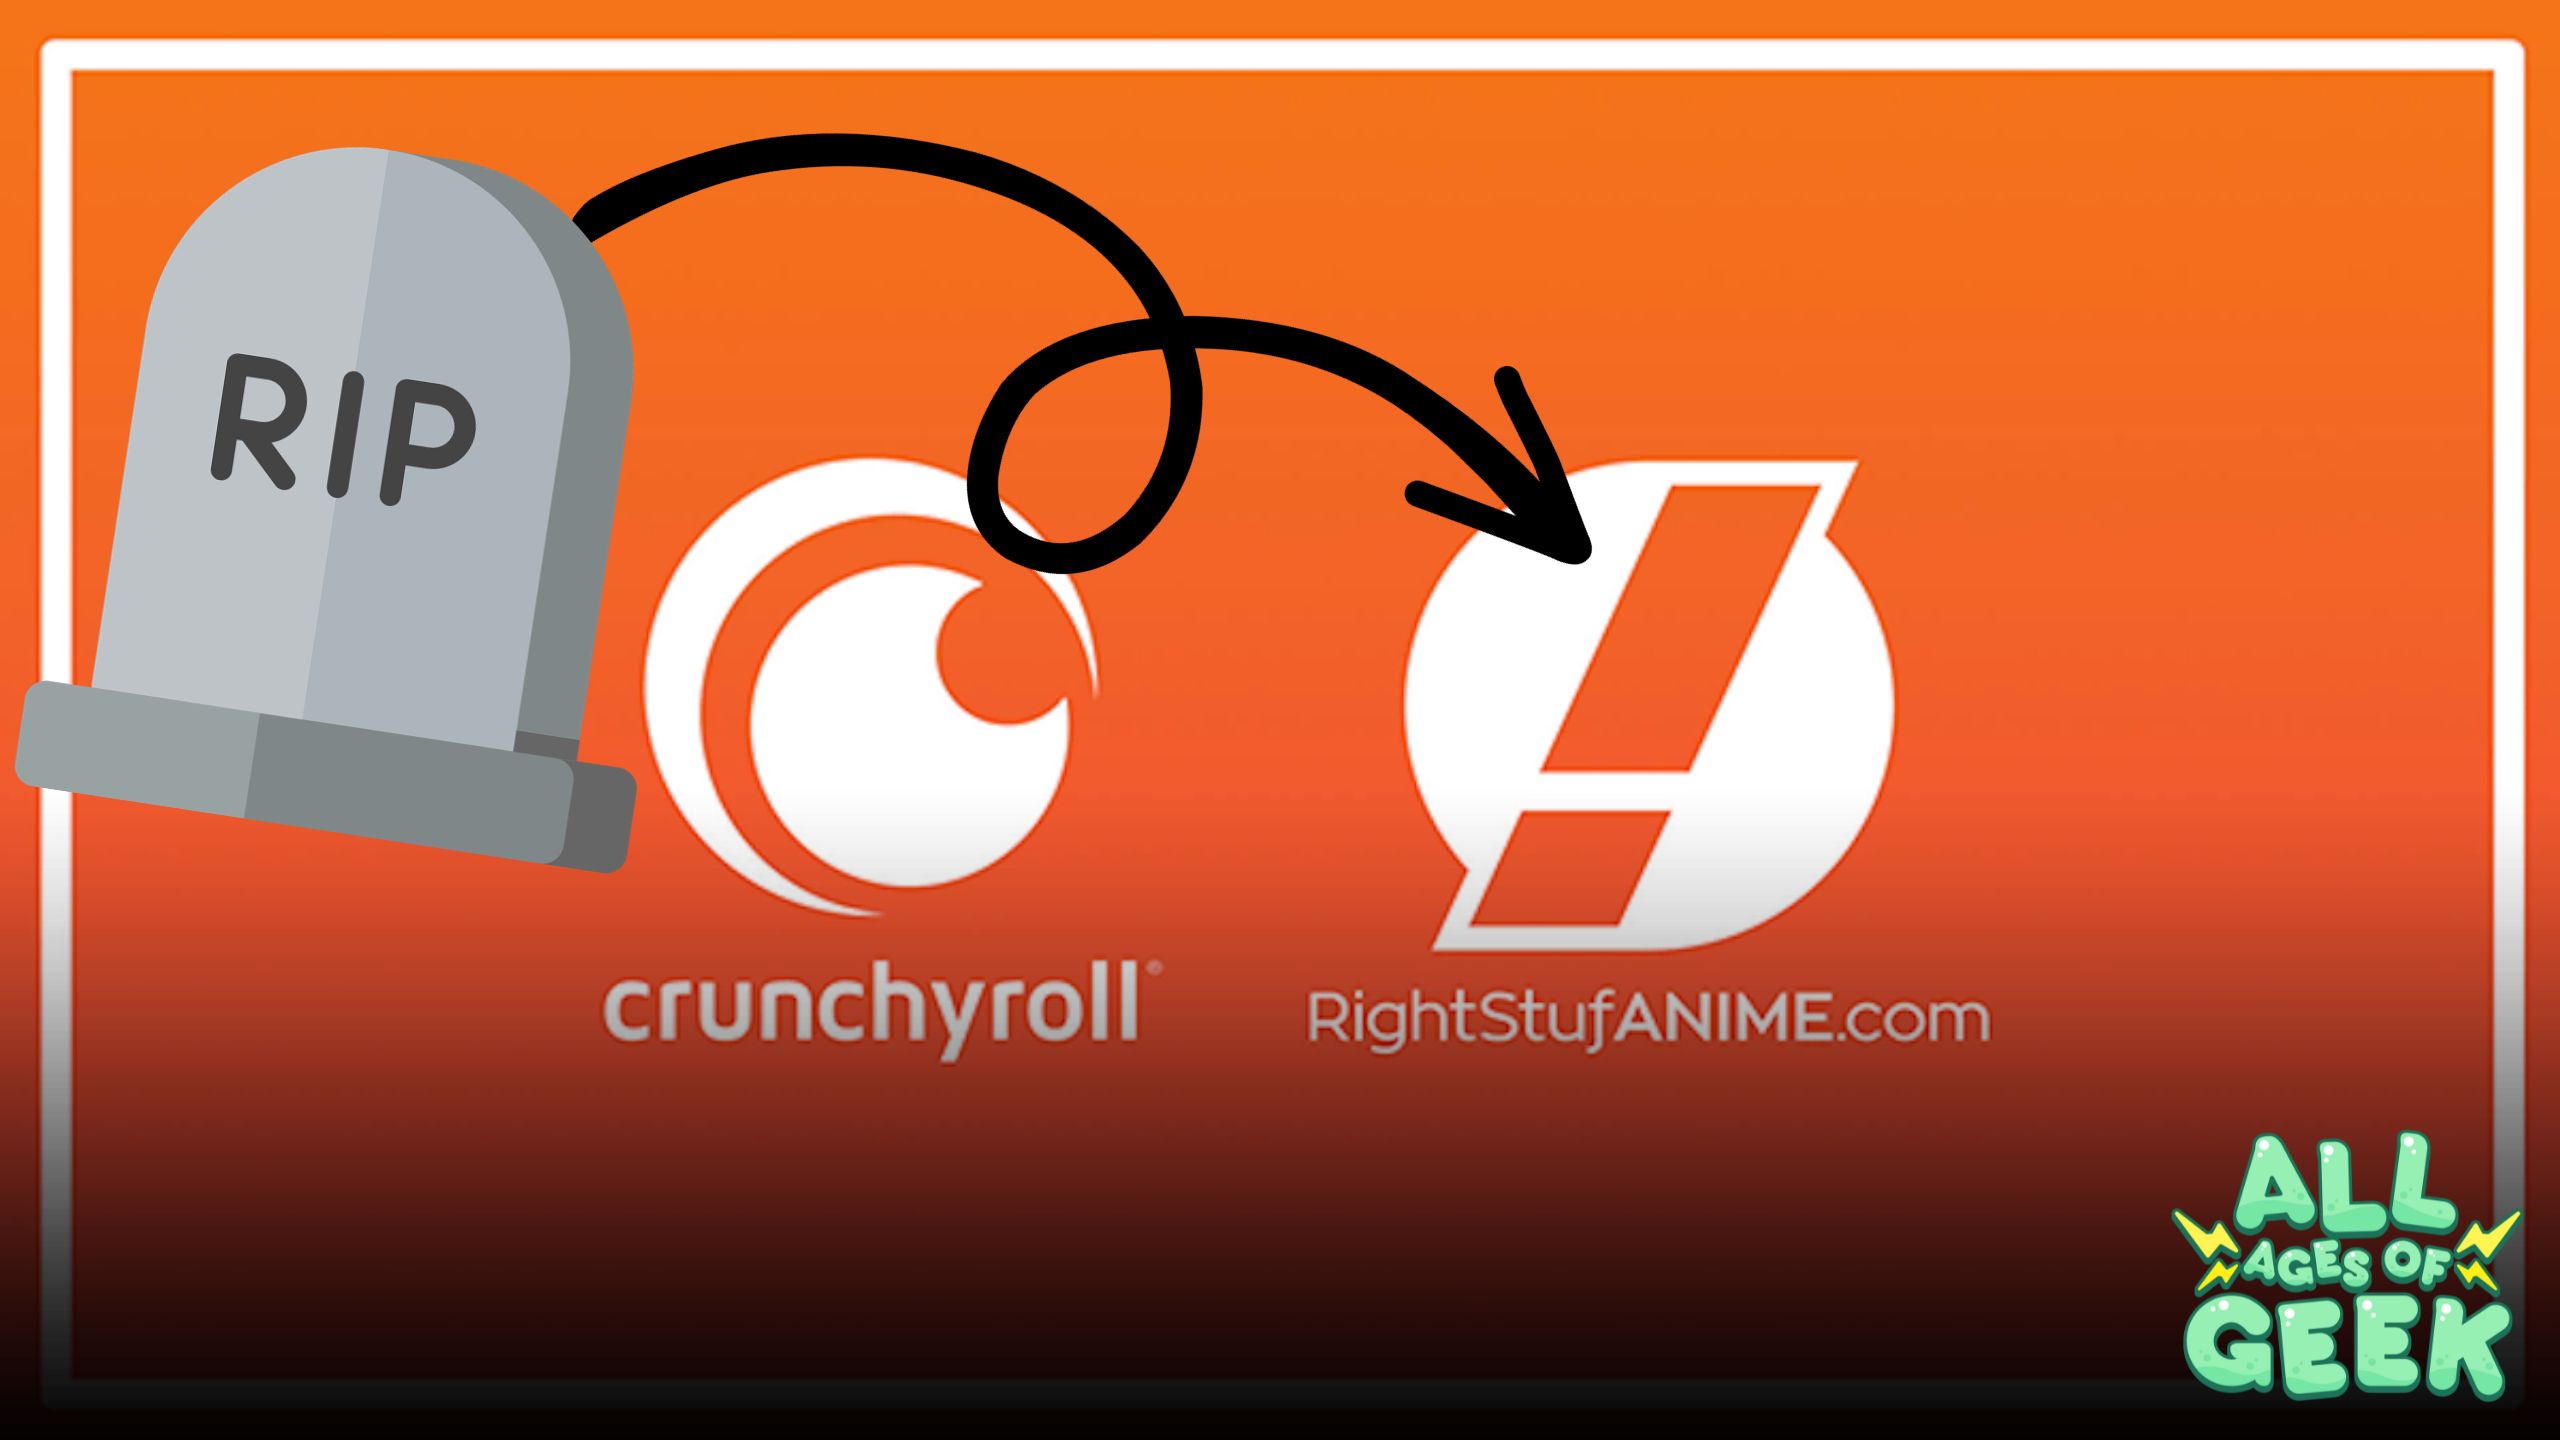 All Ages of Geek Right Stuf and Crunchyroll